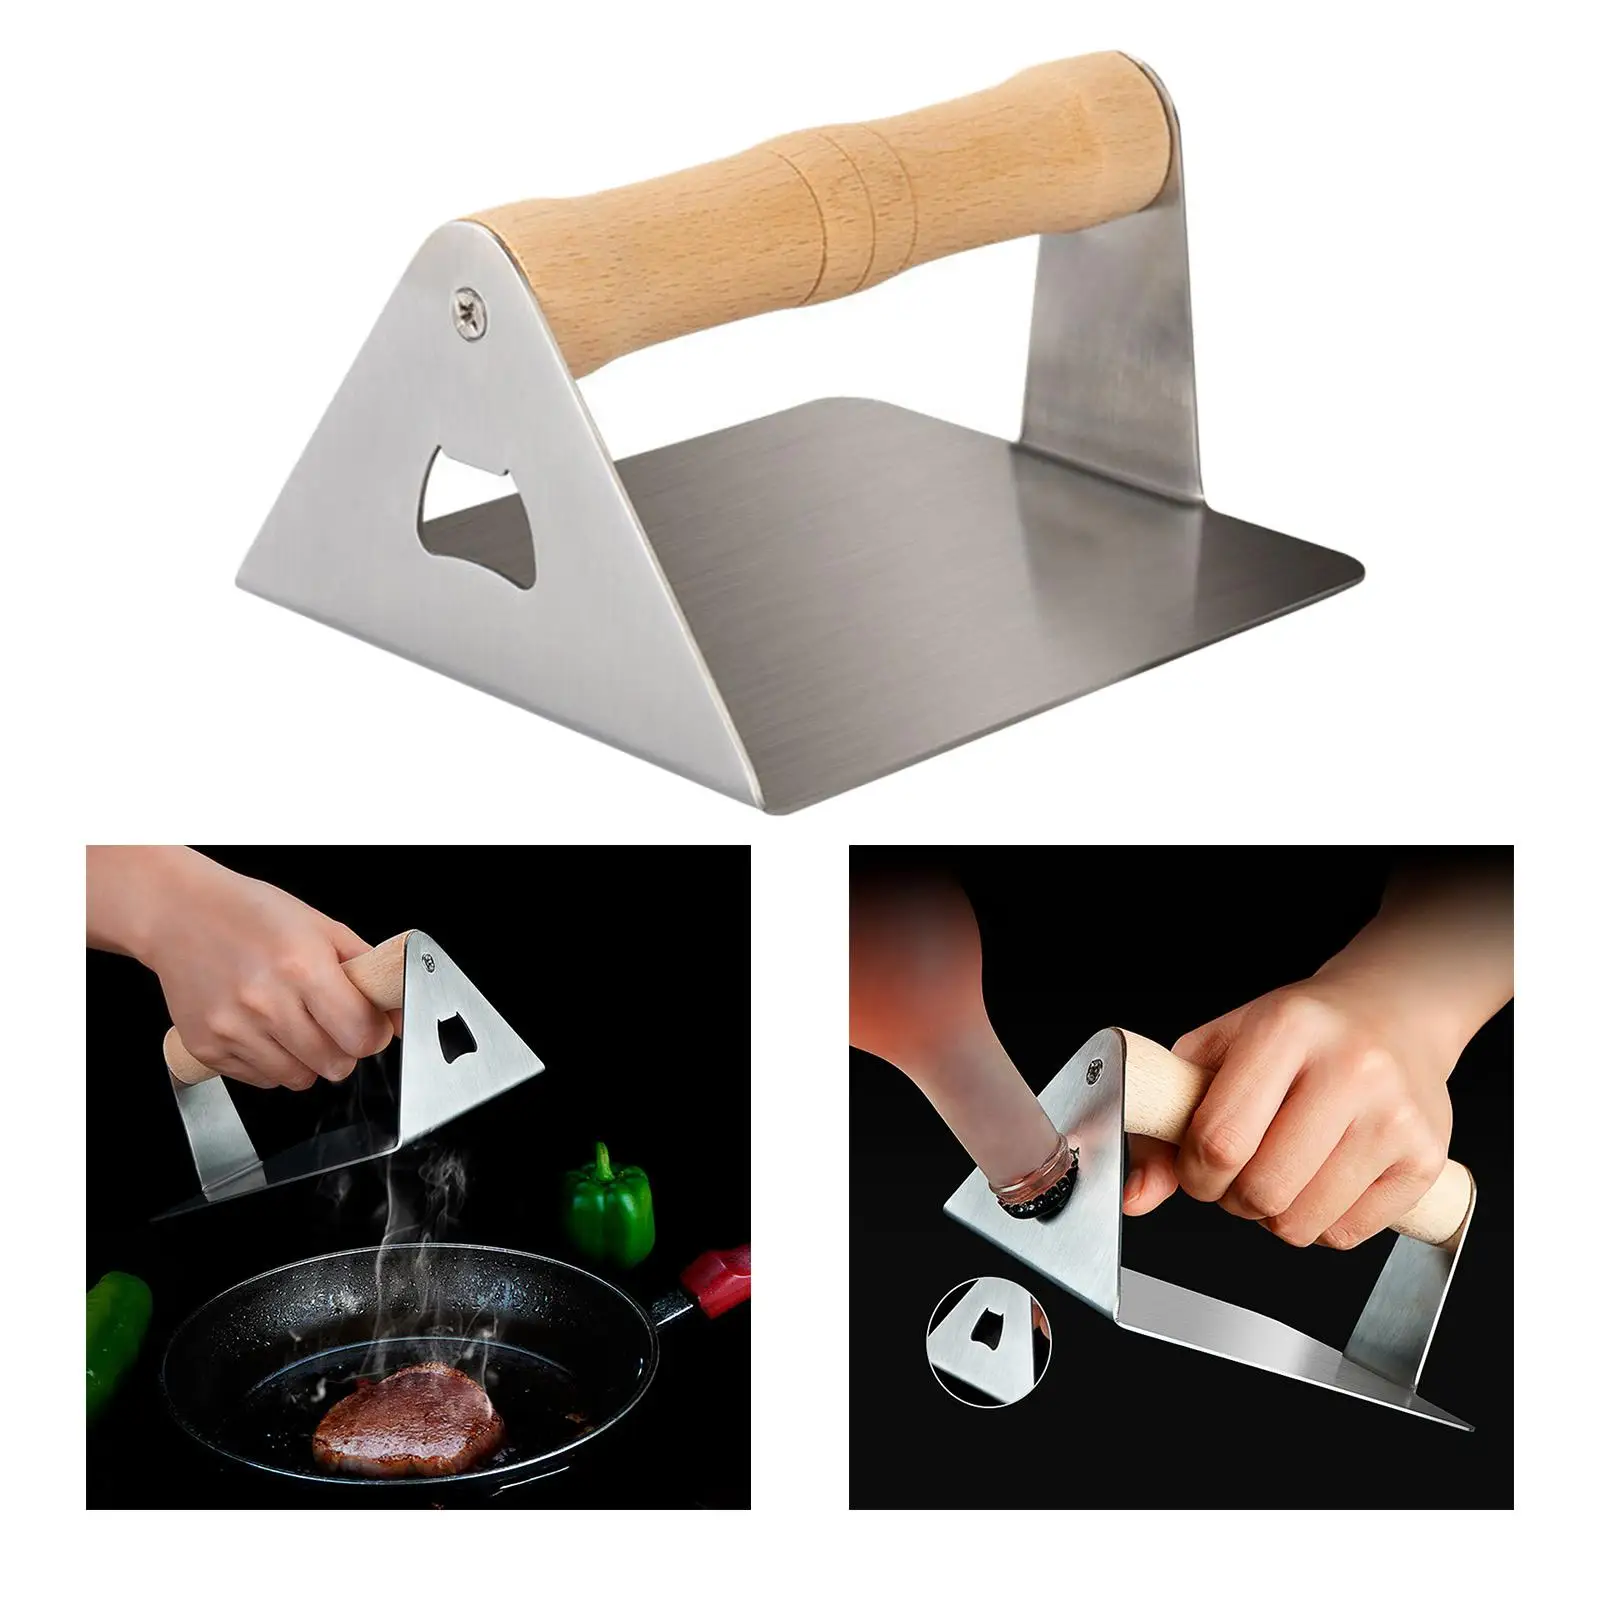 Hamburger Press Wooden Handle Non-Stick Cooking Tool Meat Press for BBQ Outdoor Camping